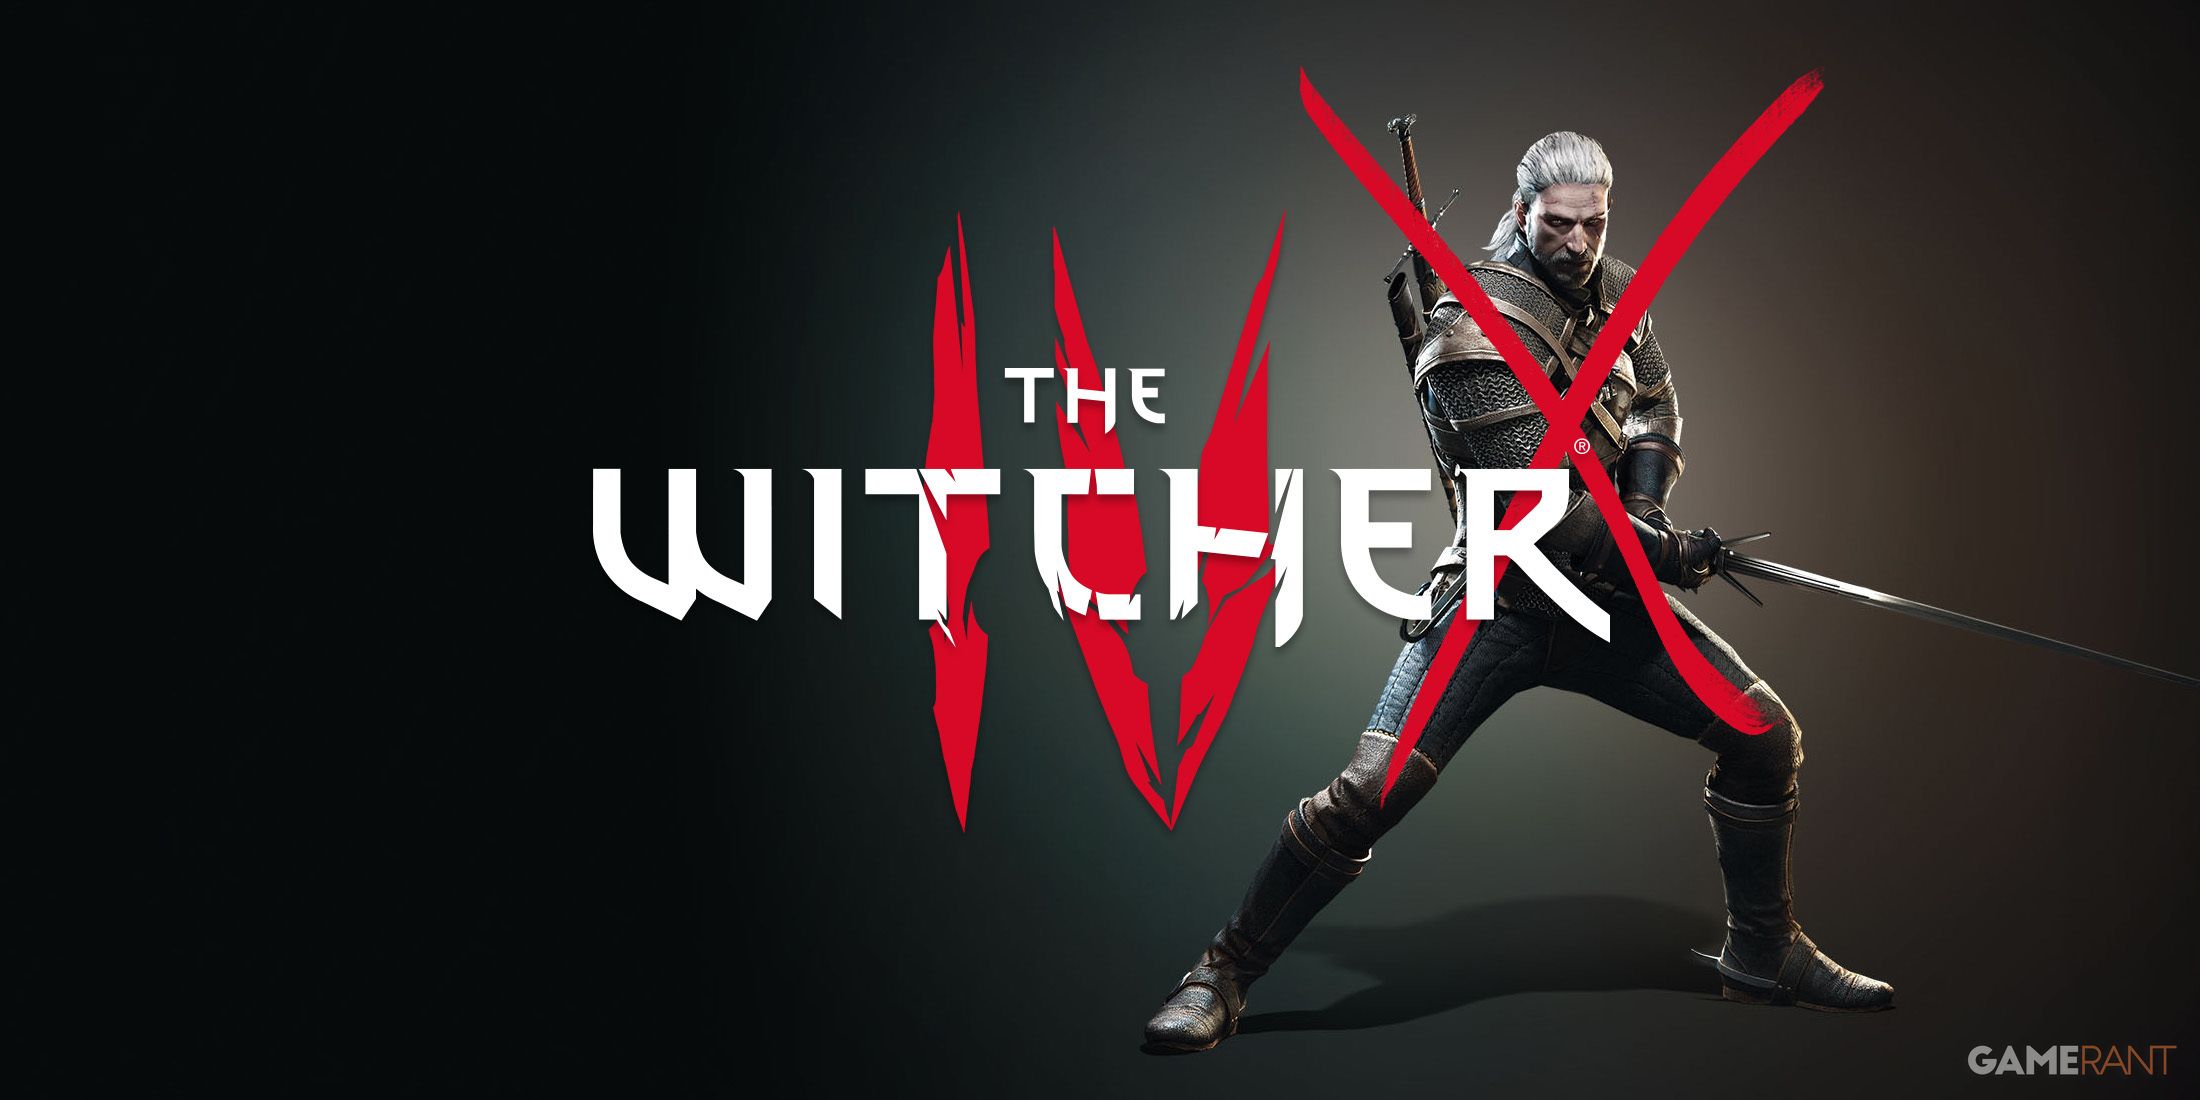 witcher-4-geralt-crossed-out-game-rant